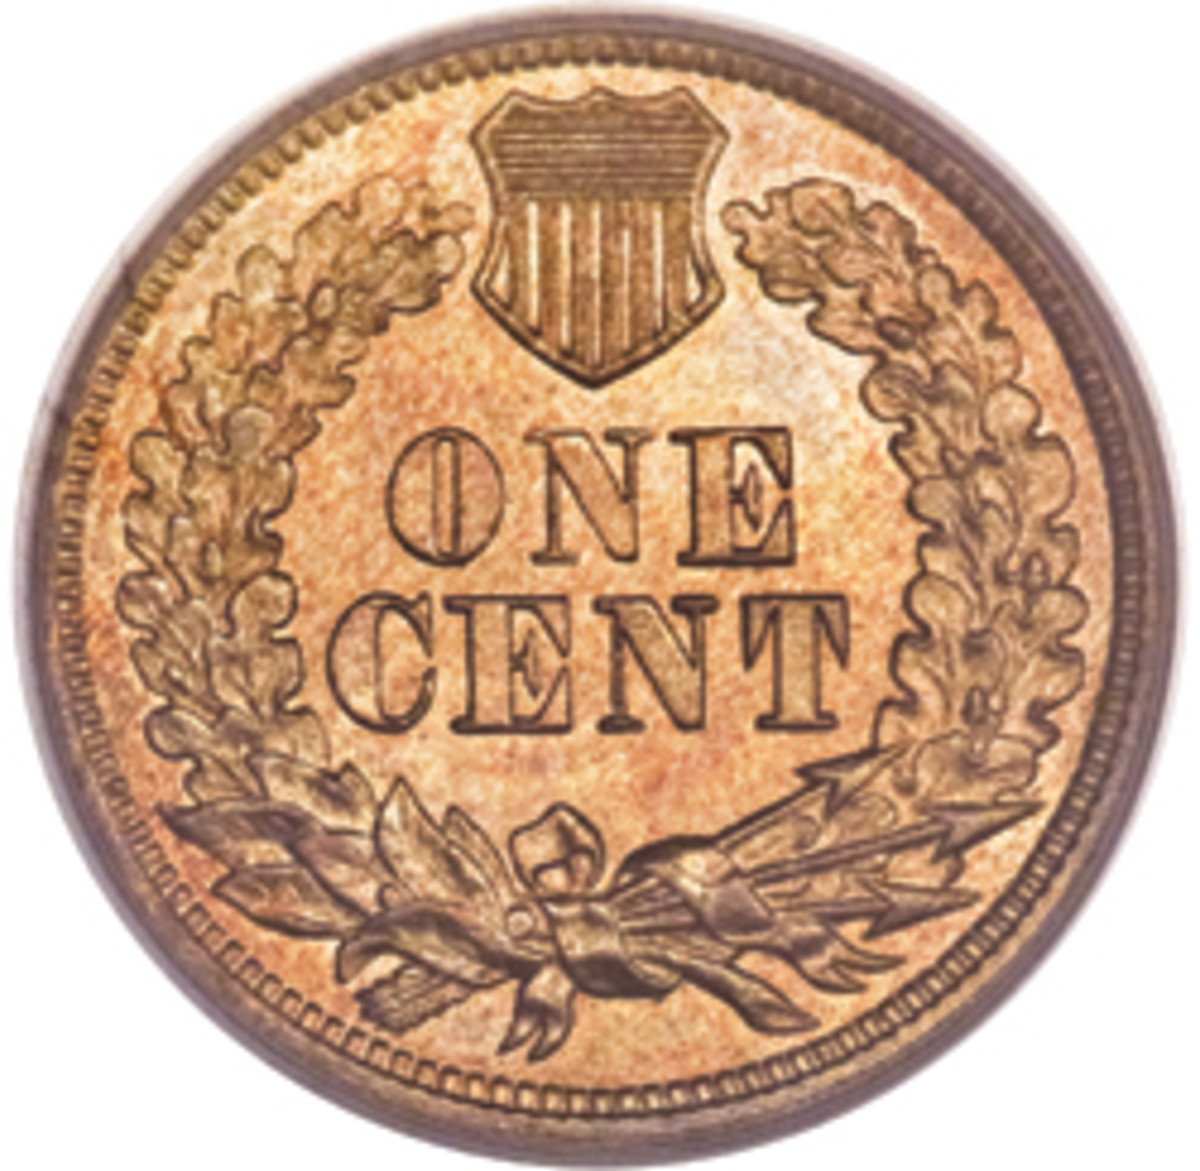  From 1864-1909, the Indian Head cent reverse was altered to show a fuller, stronger wreath with a Union shield between the ends of it. (Image courtesy Heritage Auctions)